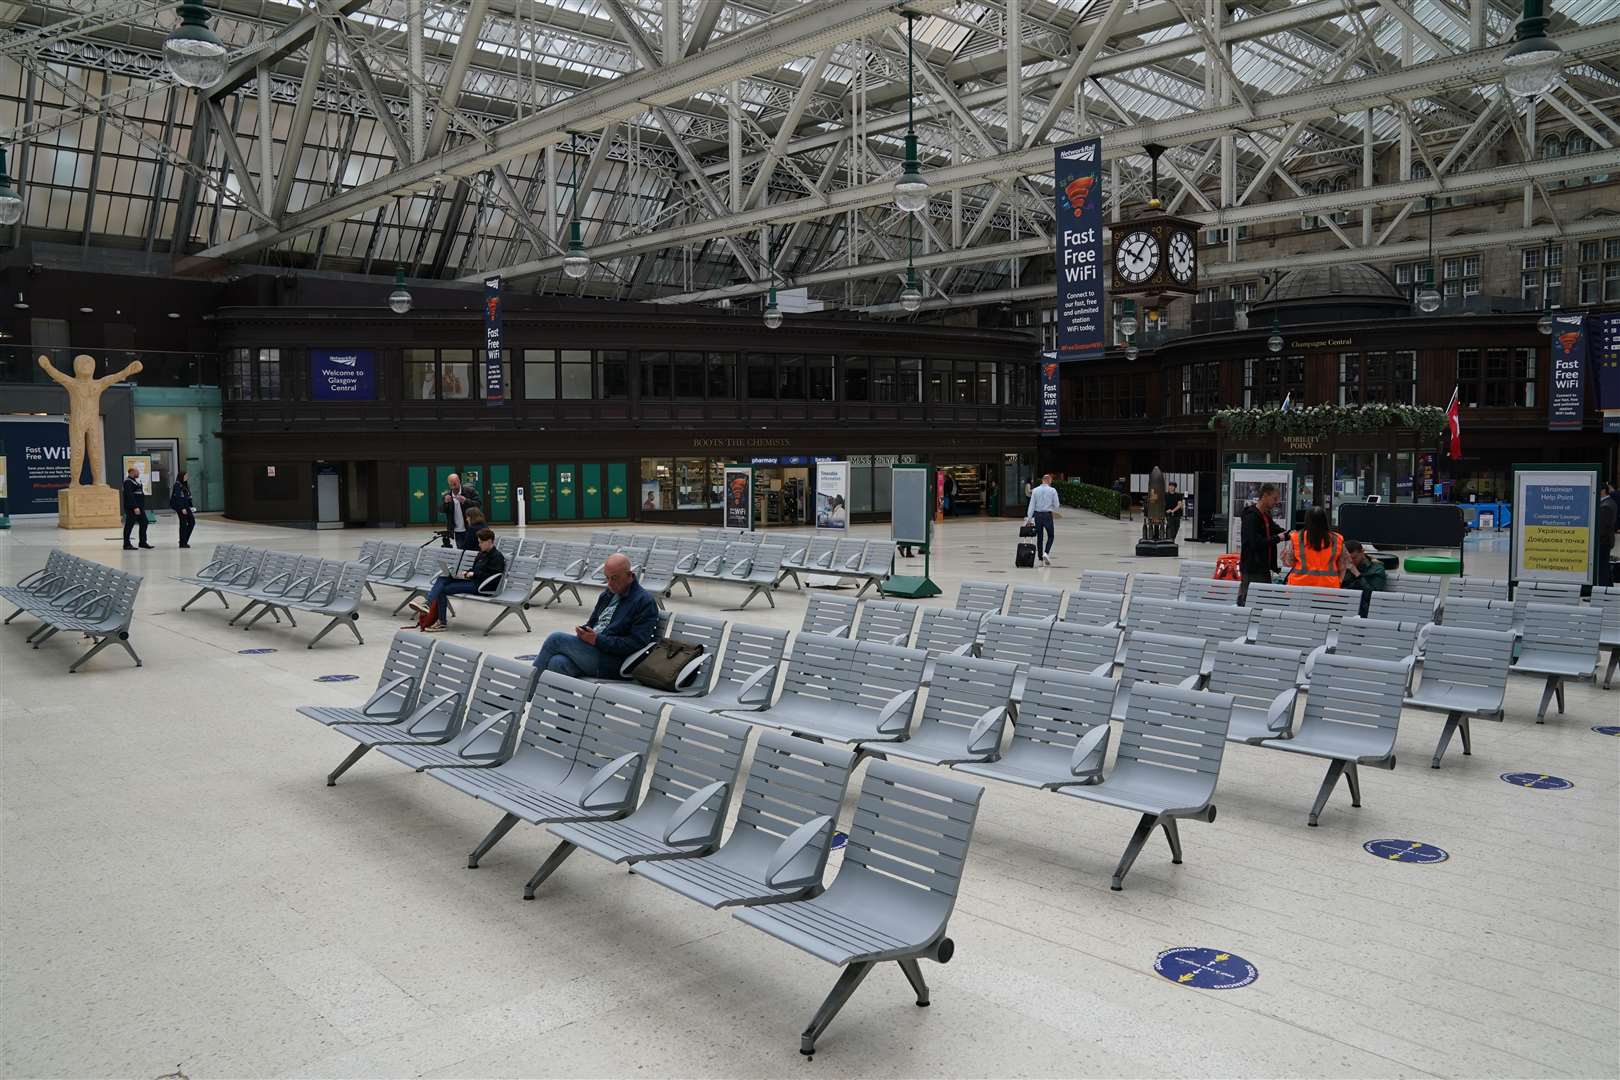 Glasgow Central Station lies almost deserted on Tuesday (Andrew Milligan/PA)